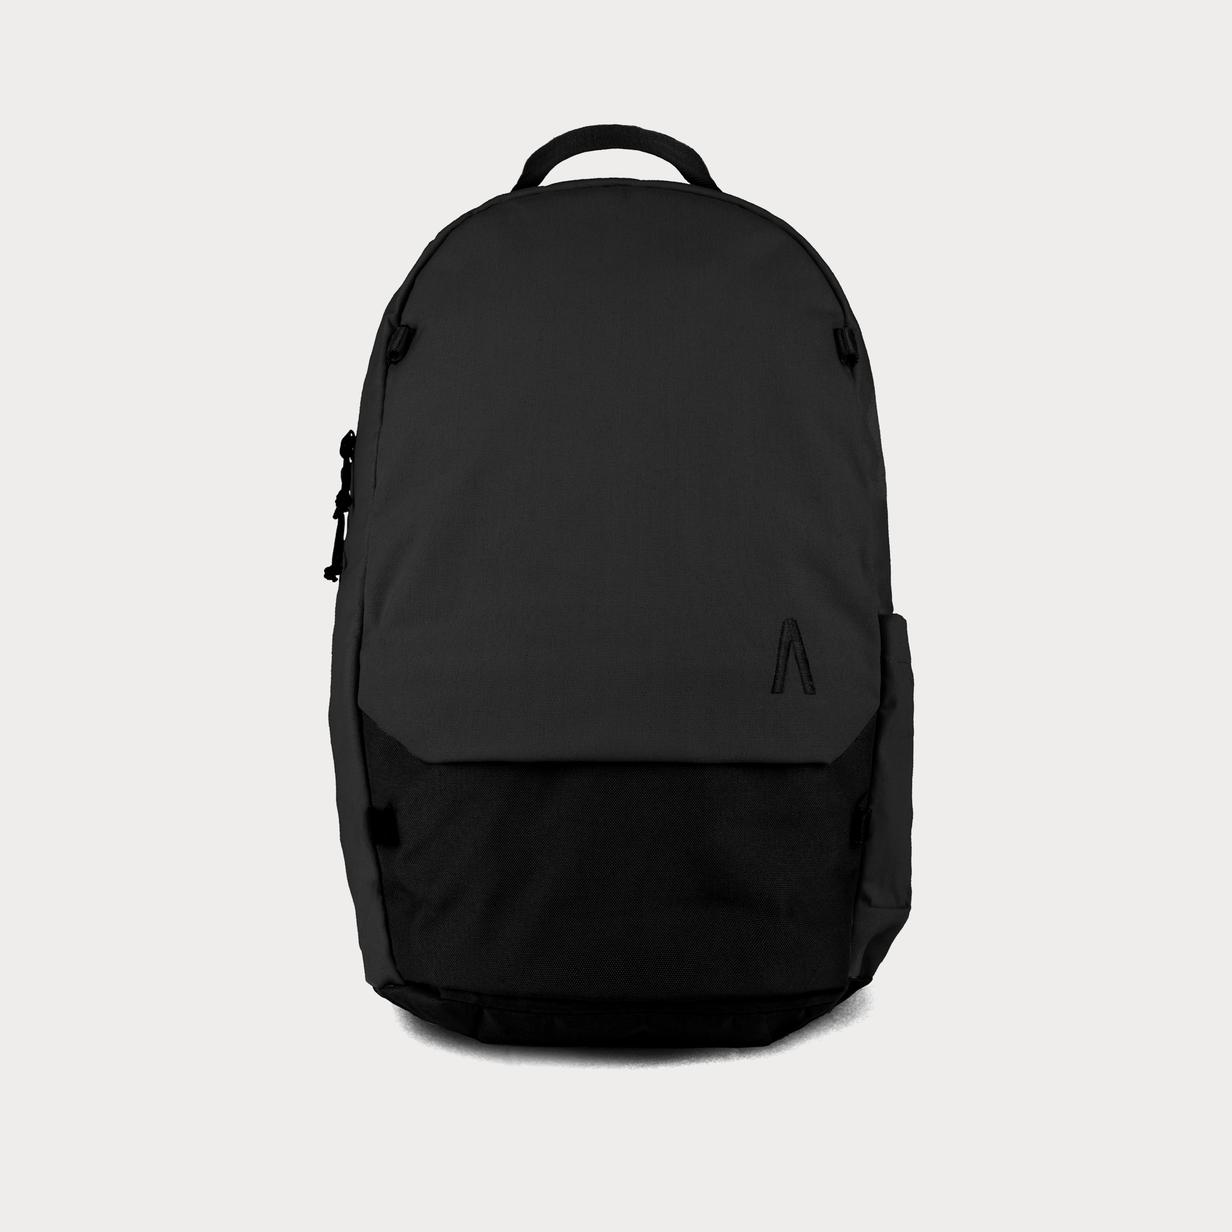 Moment DPS CD BLK Rennen Recycled Laptop Daypack 22 L Black 01